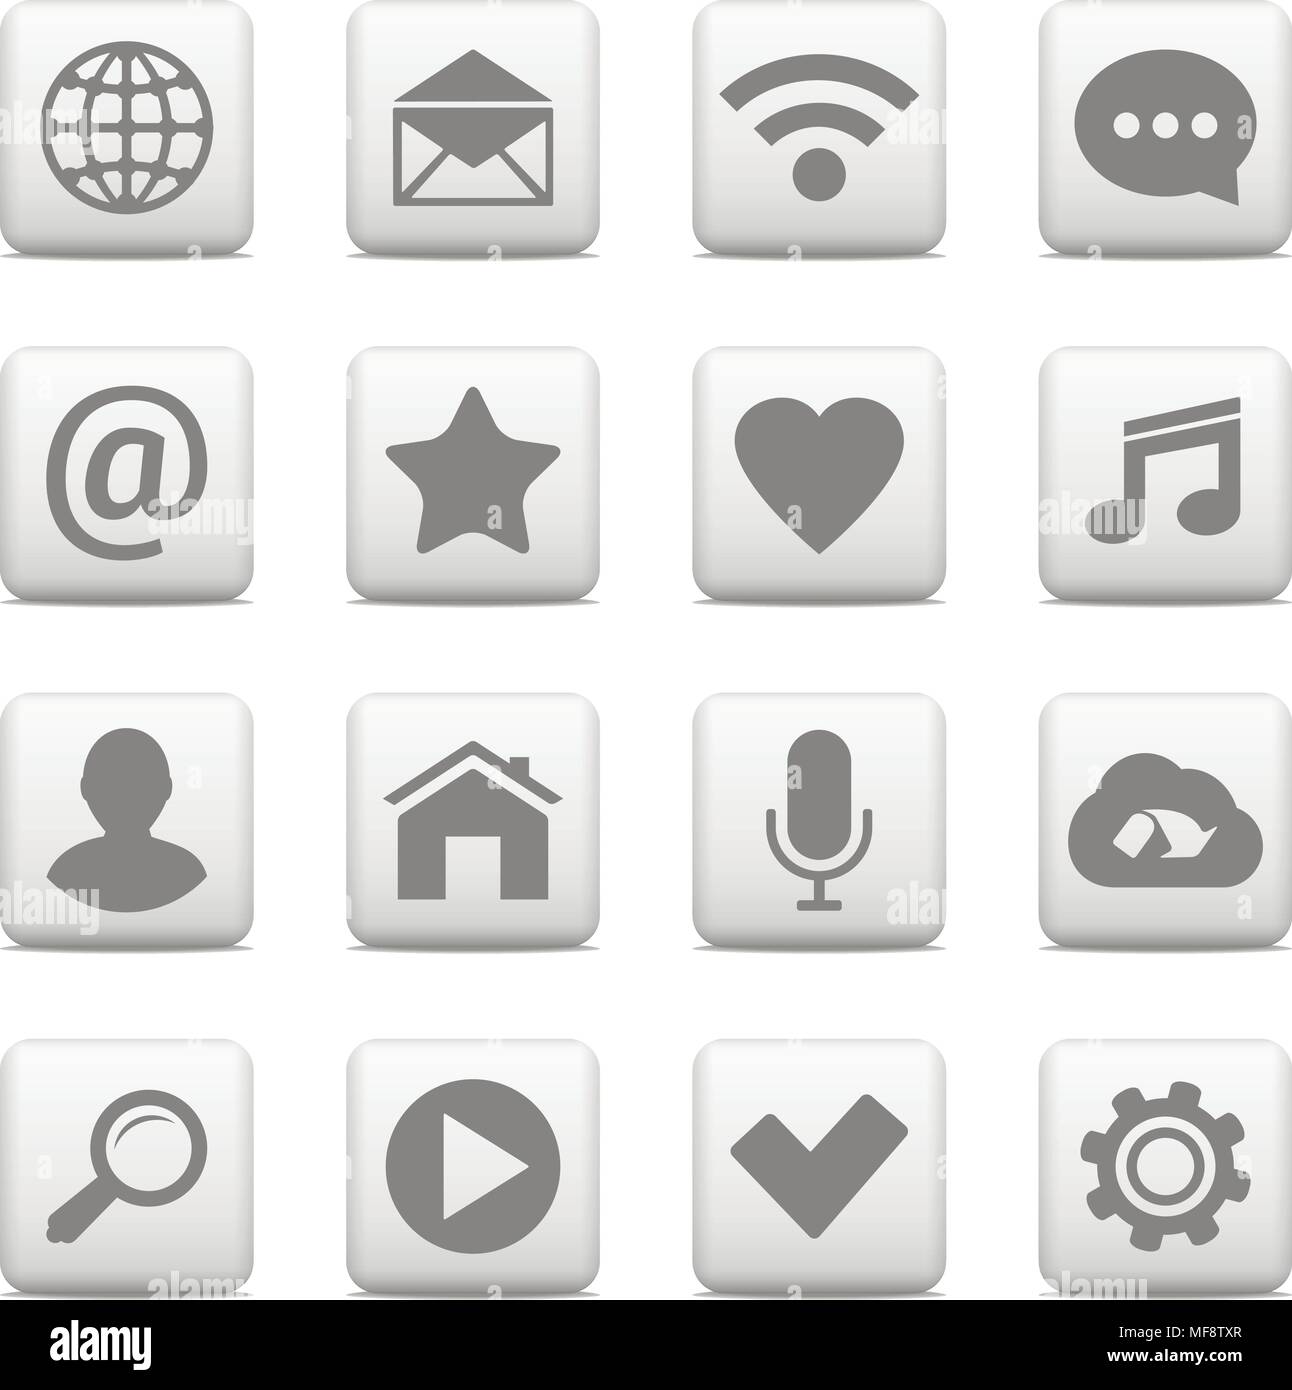 Vector set of universal icons on web buttons, communication, contact, mobile and social network. Stock Vector